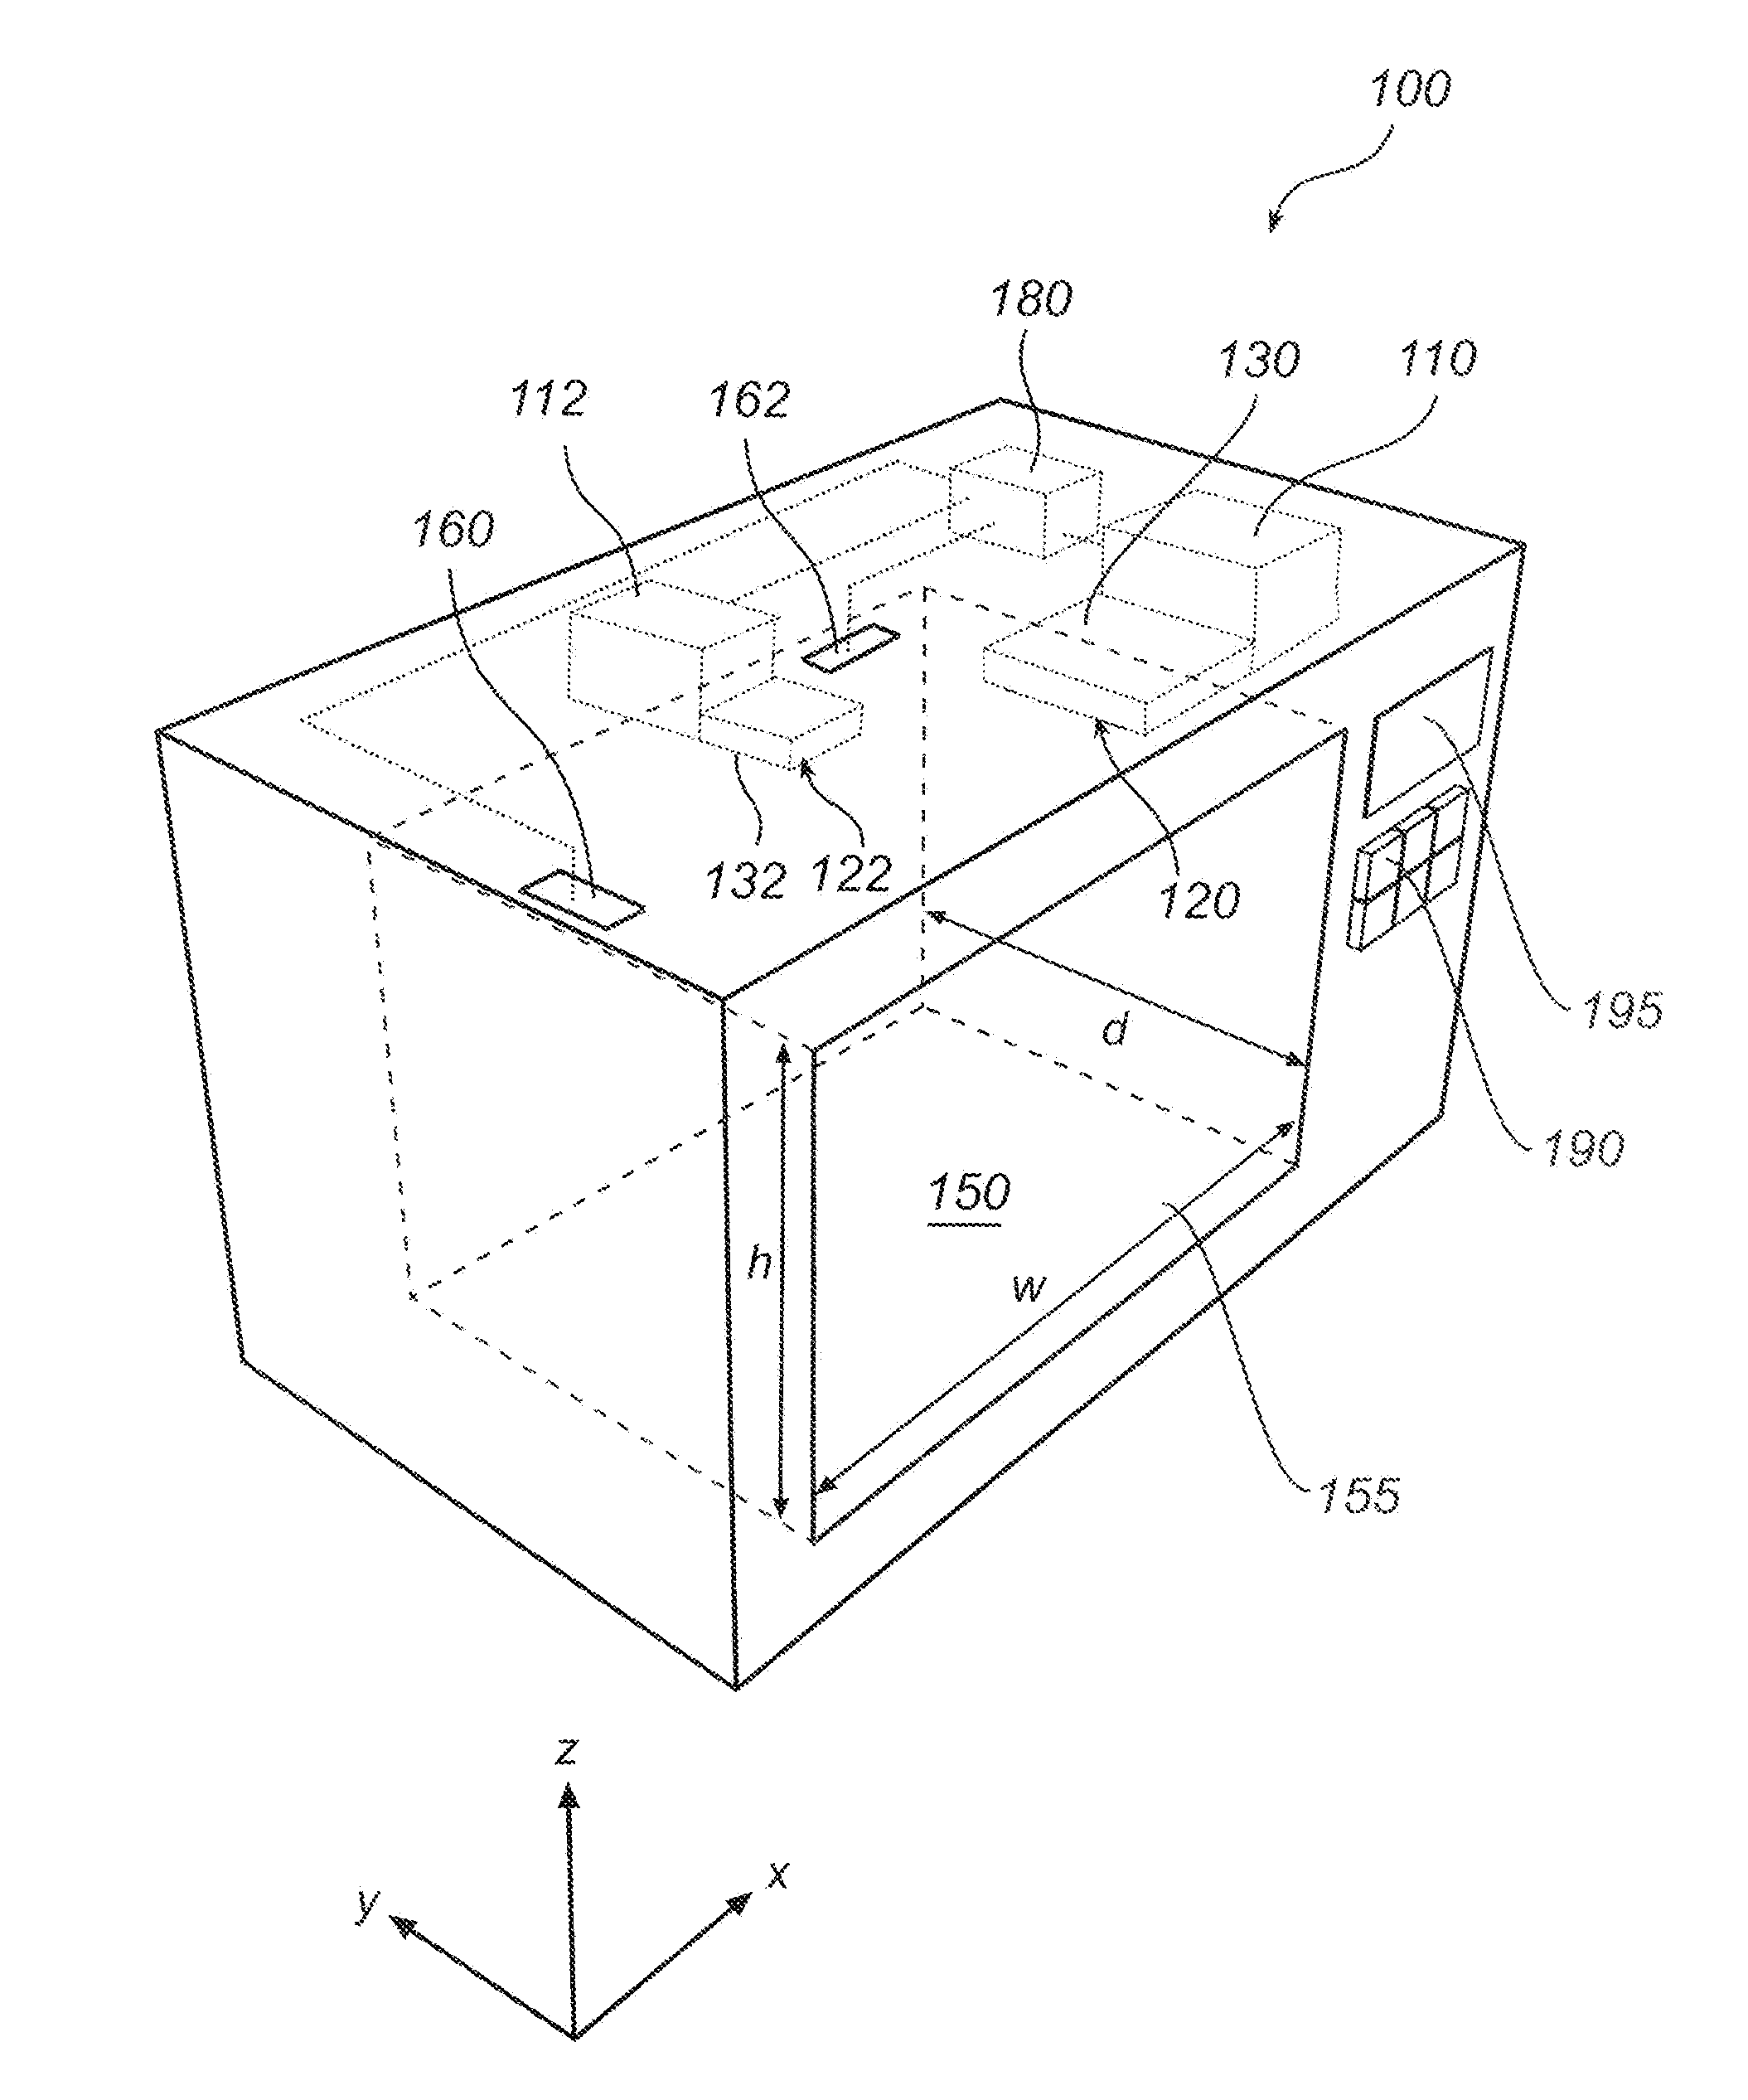 Microwave oven with a regulation system using field sensors